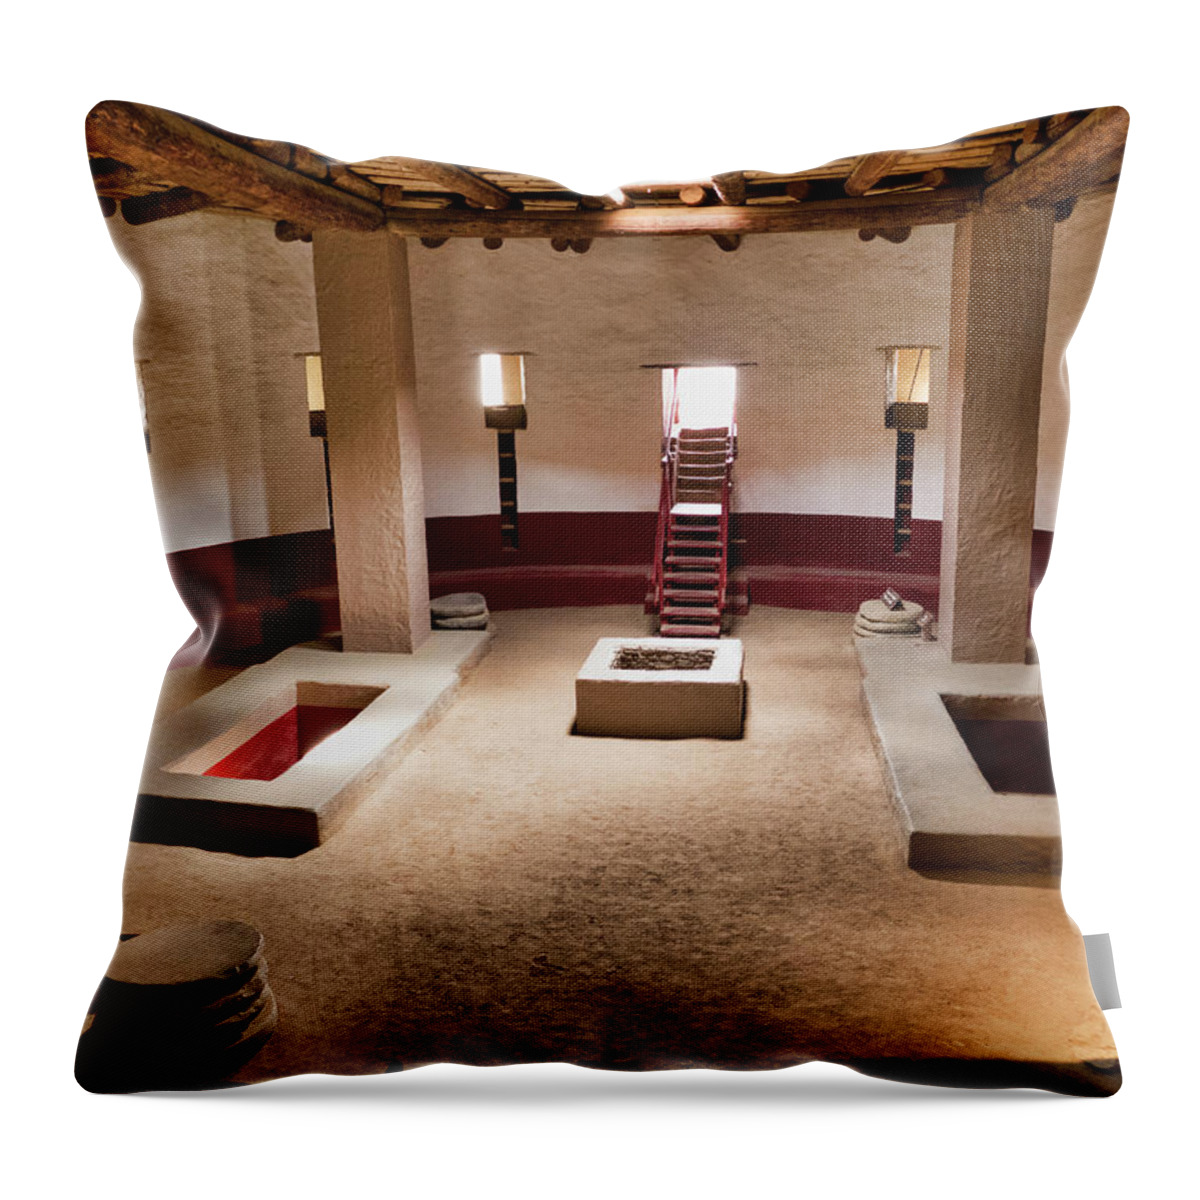 Pueblo Cultures Throw Pillow featuring the photograph Reconstructed Kive, Aztec Ruin, NM by Segura Shaw Photography